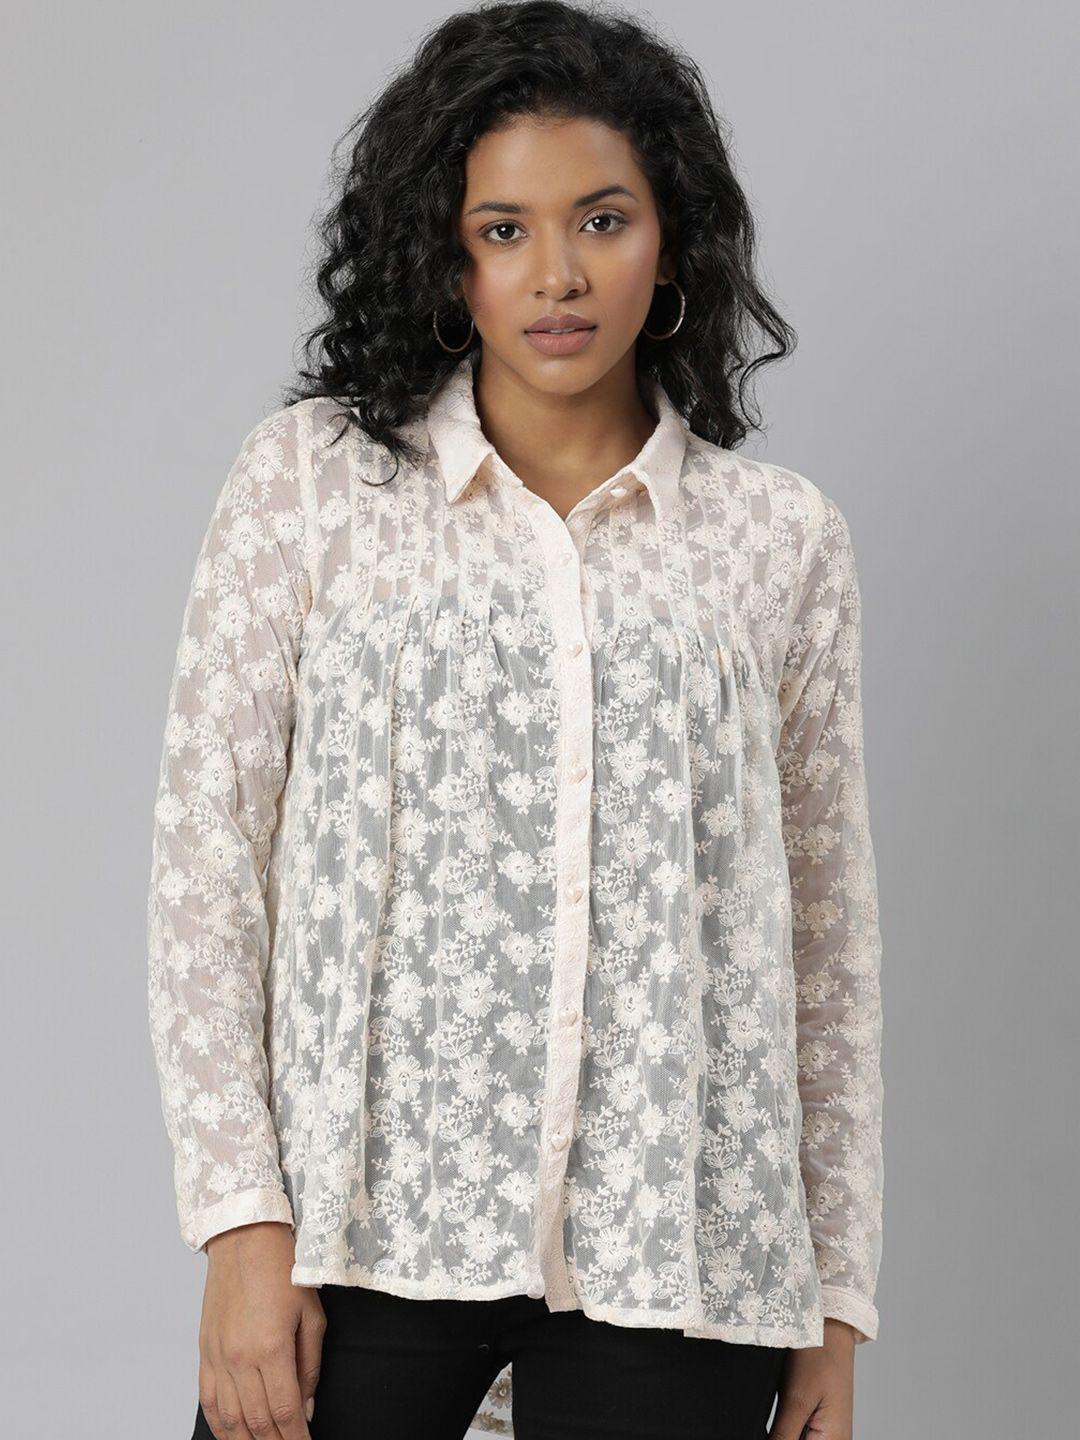 showoff floral embroidered shirt collar semi sheer shirt style top